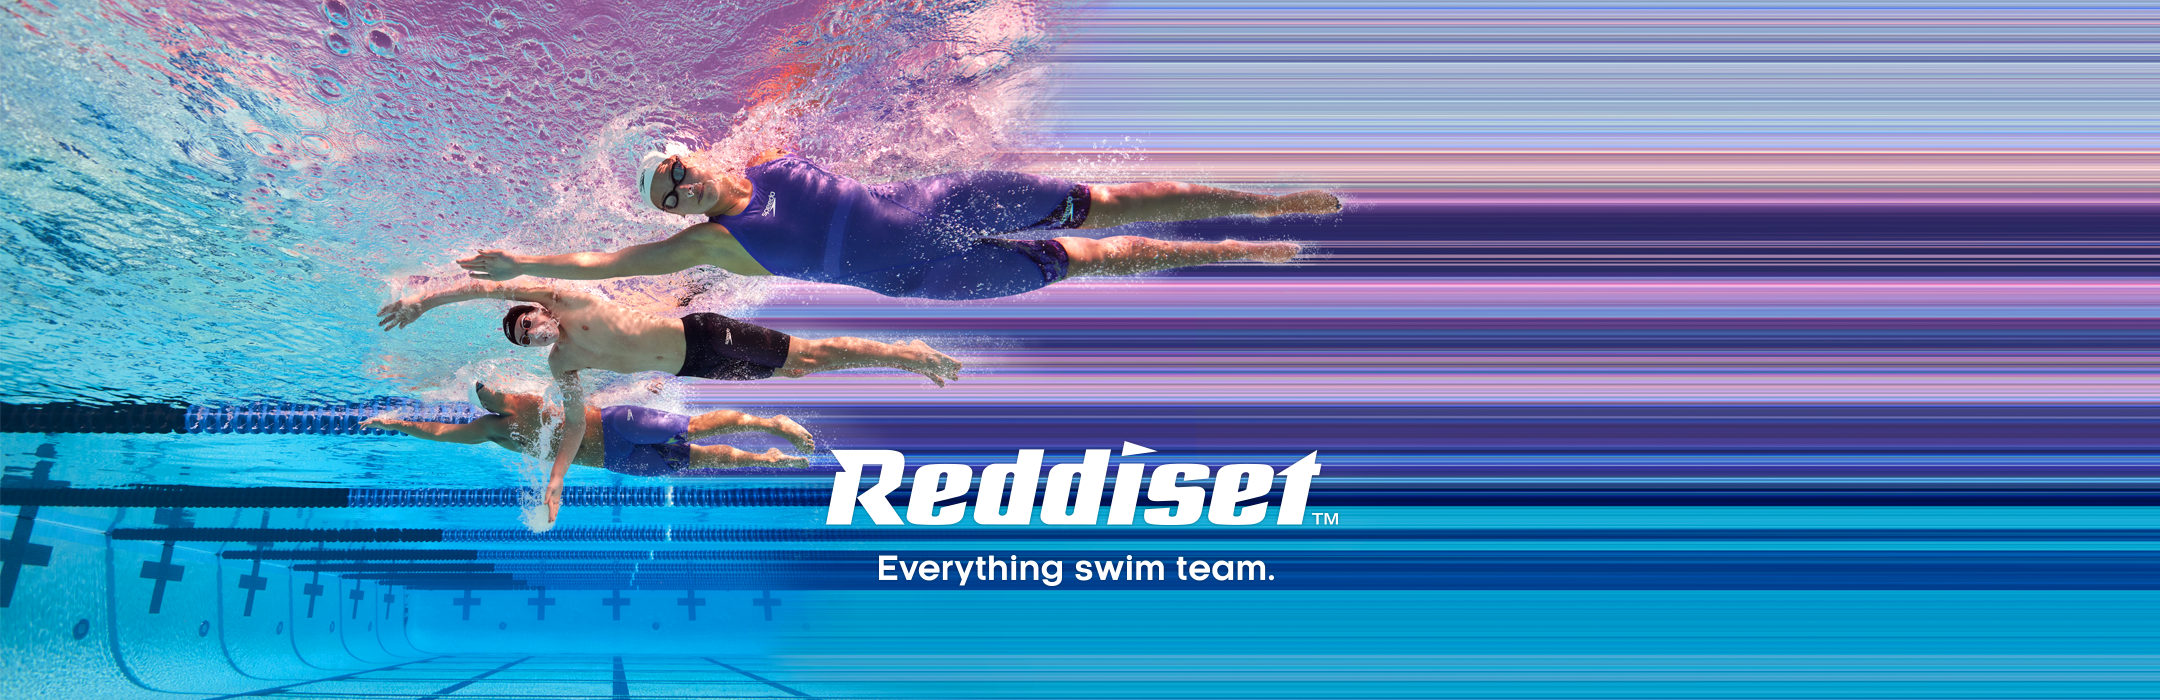 Reddiset Your One-Stop Shop for Swim Team Support and Swim Products